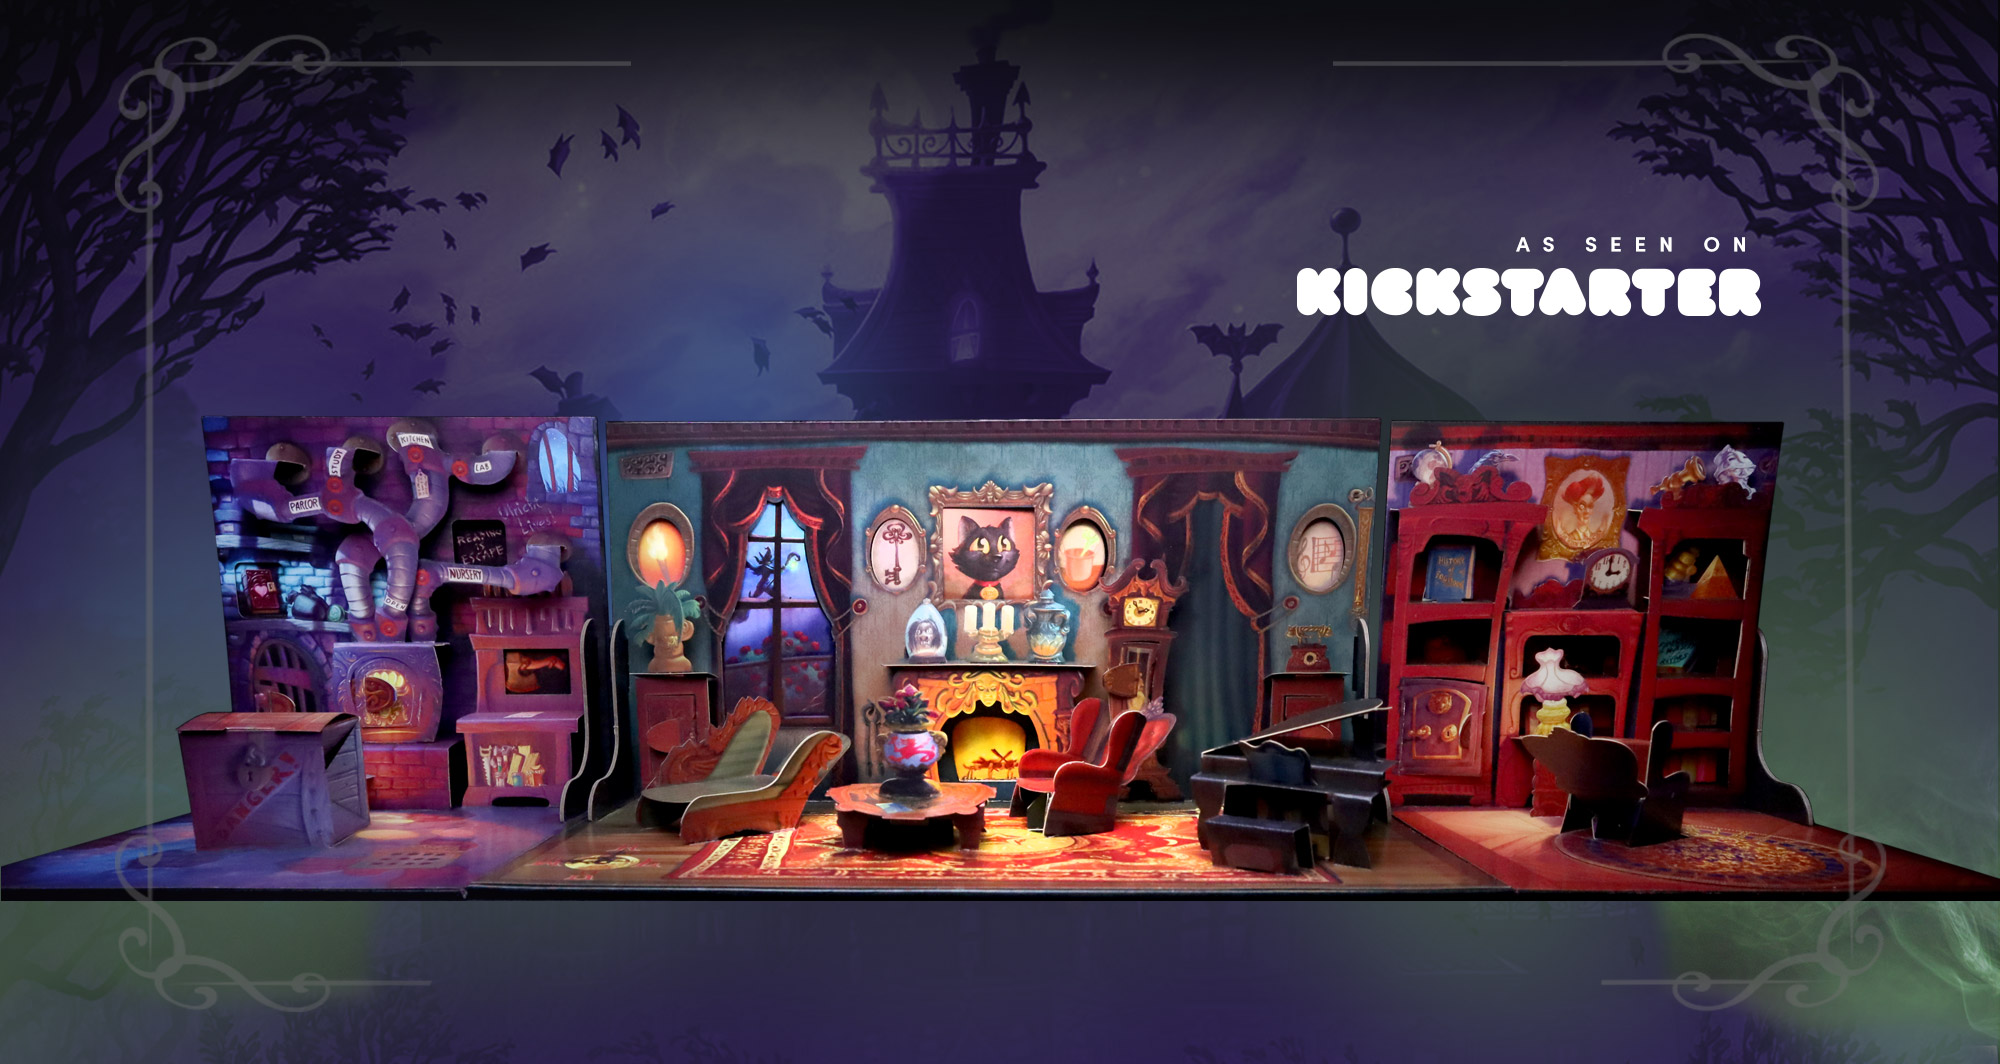 Image of the game open displaying 3 rooms